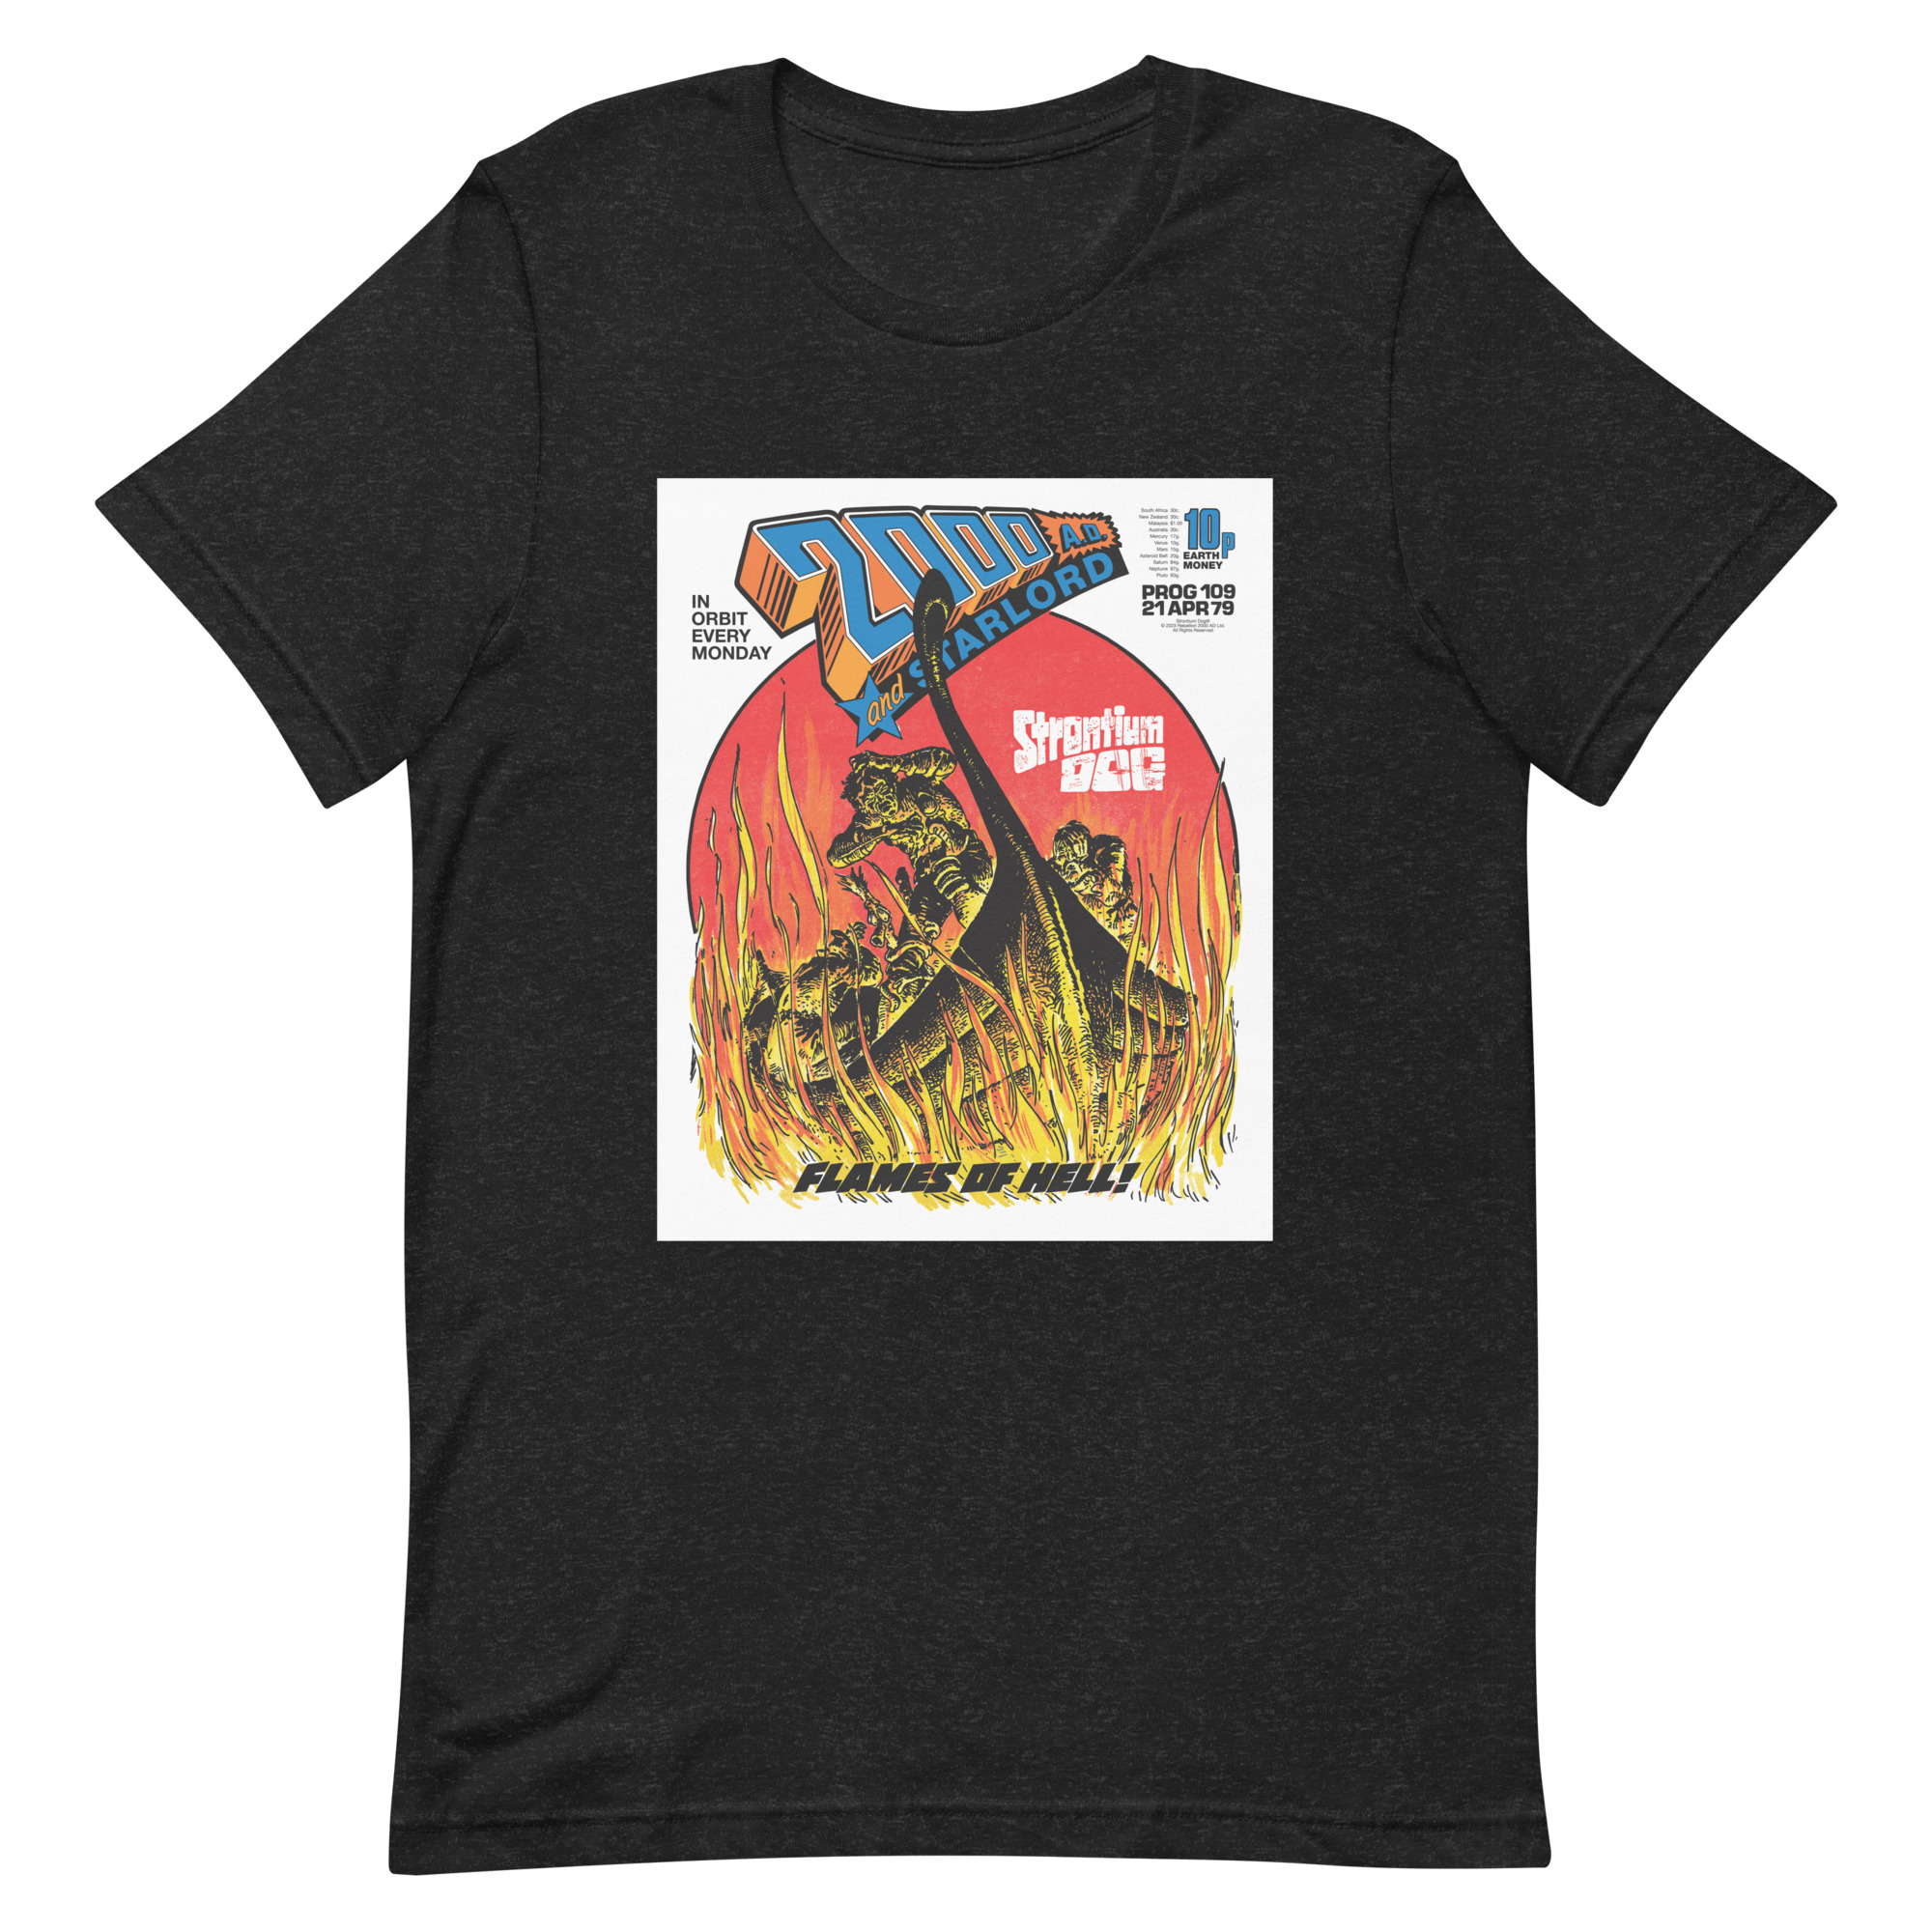 Black Tshirt with an image on the chest. Image is cover of 2000 AD Prog 109 and shows a viking ship wreathed in flames